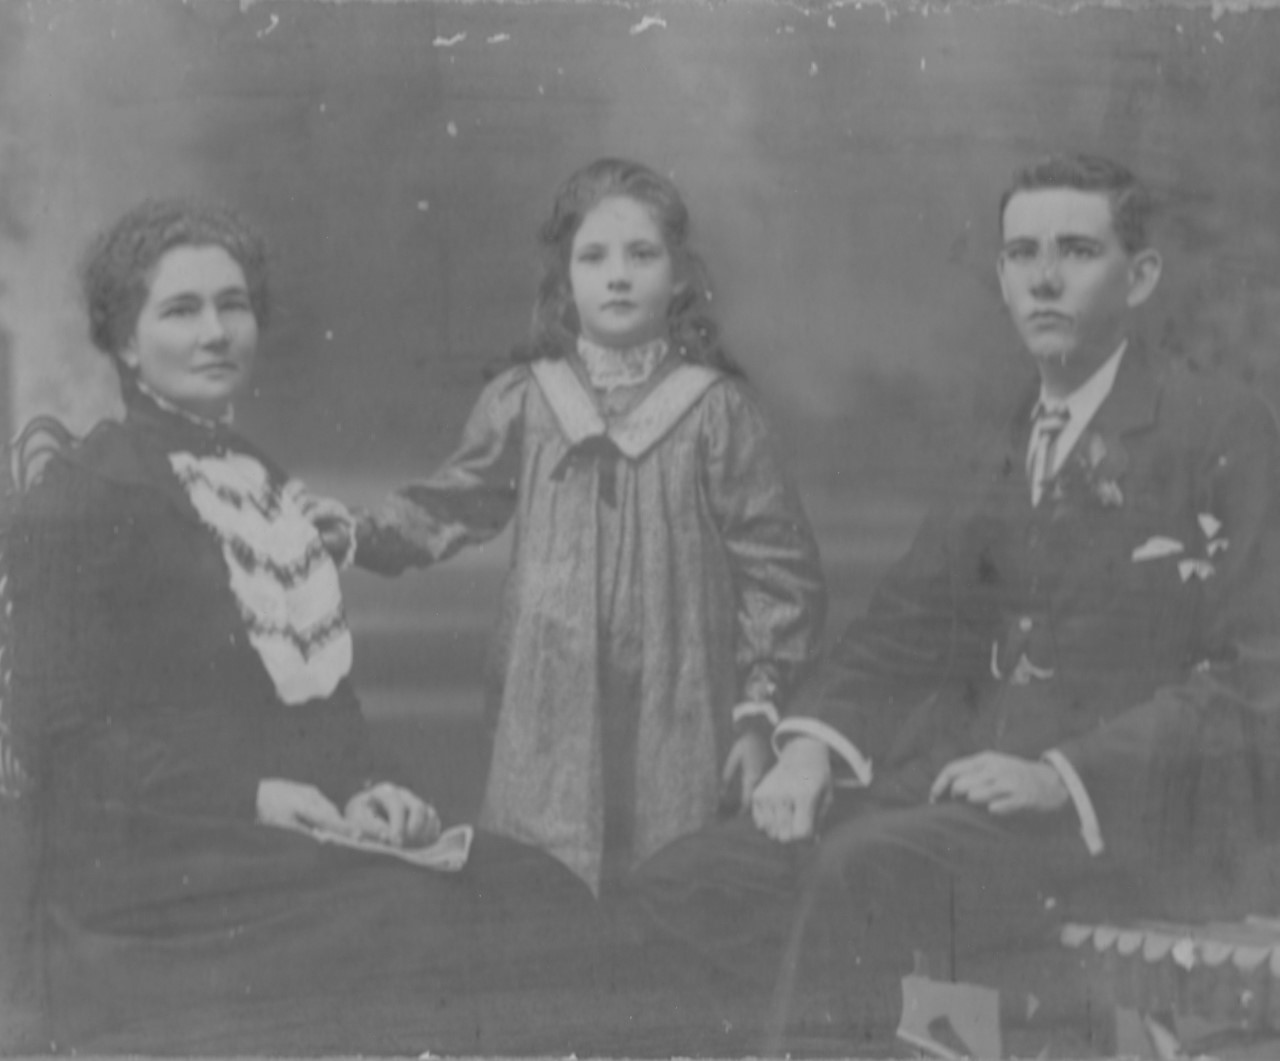 Family portrait of Mary Ann Winifred Low (nee Oram) with her children Winifred Fanny Low and George Low